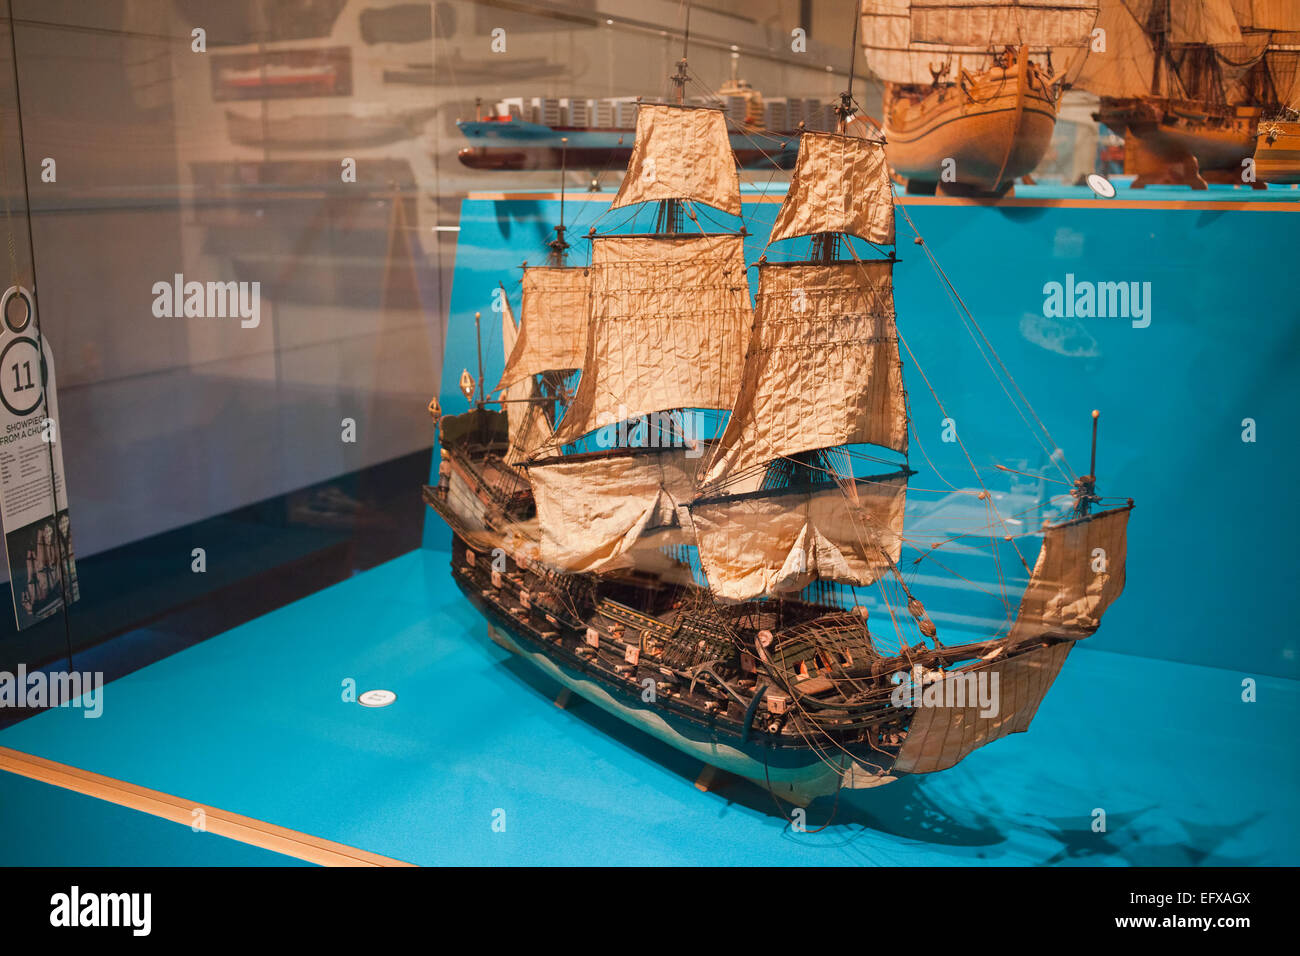 Galleon sailing ship model in Rotterdam Maritime Museum, Holland, Netherlands. Stock Photo